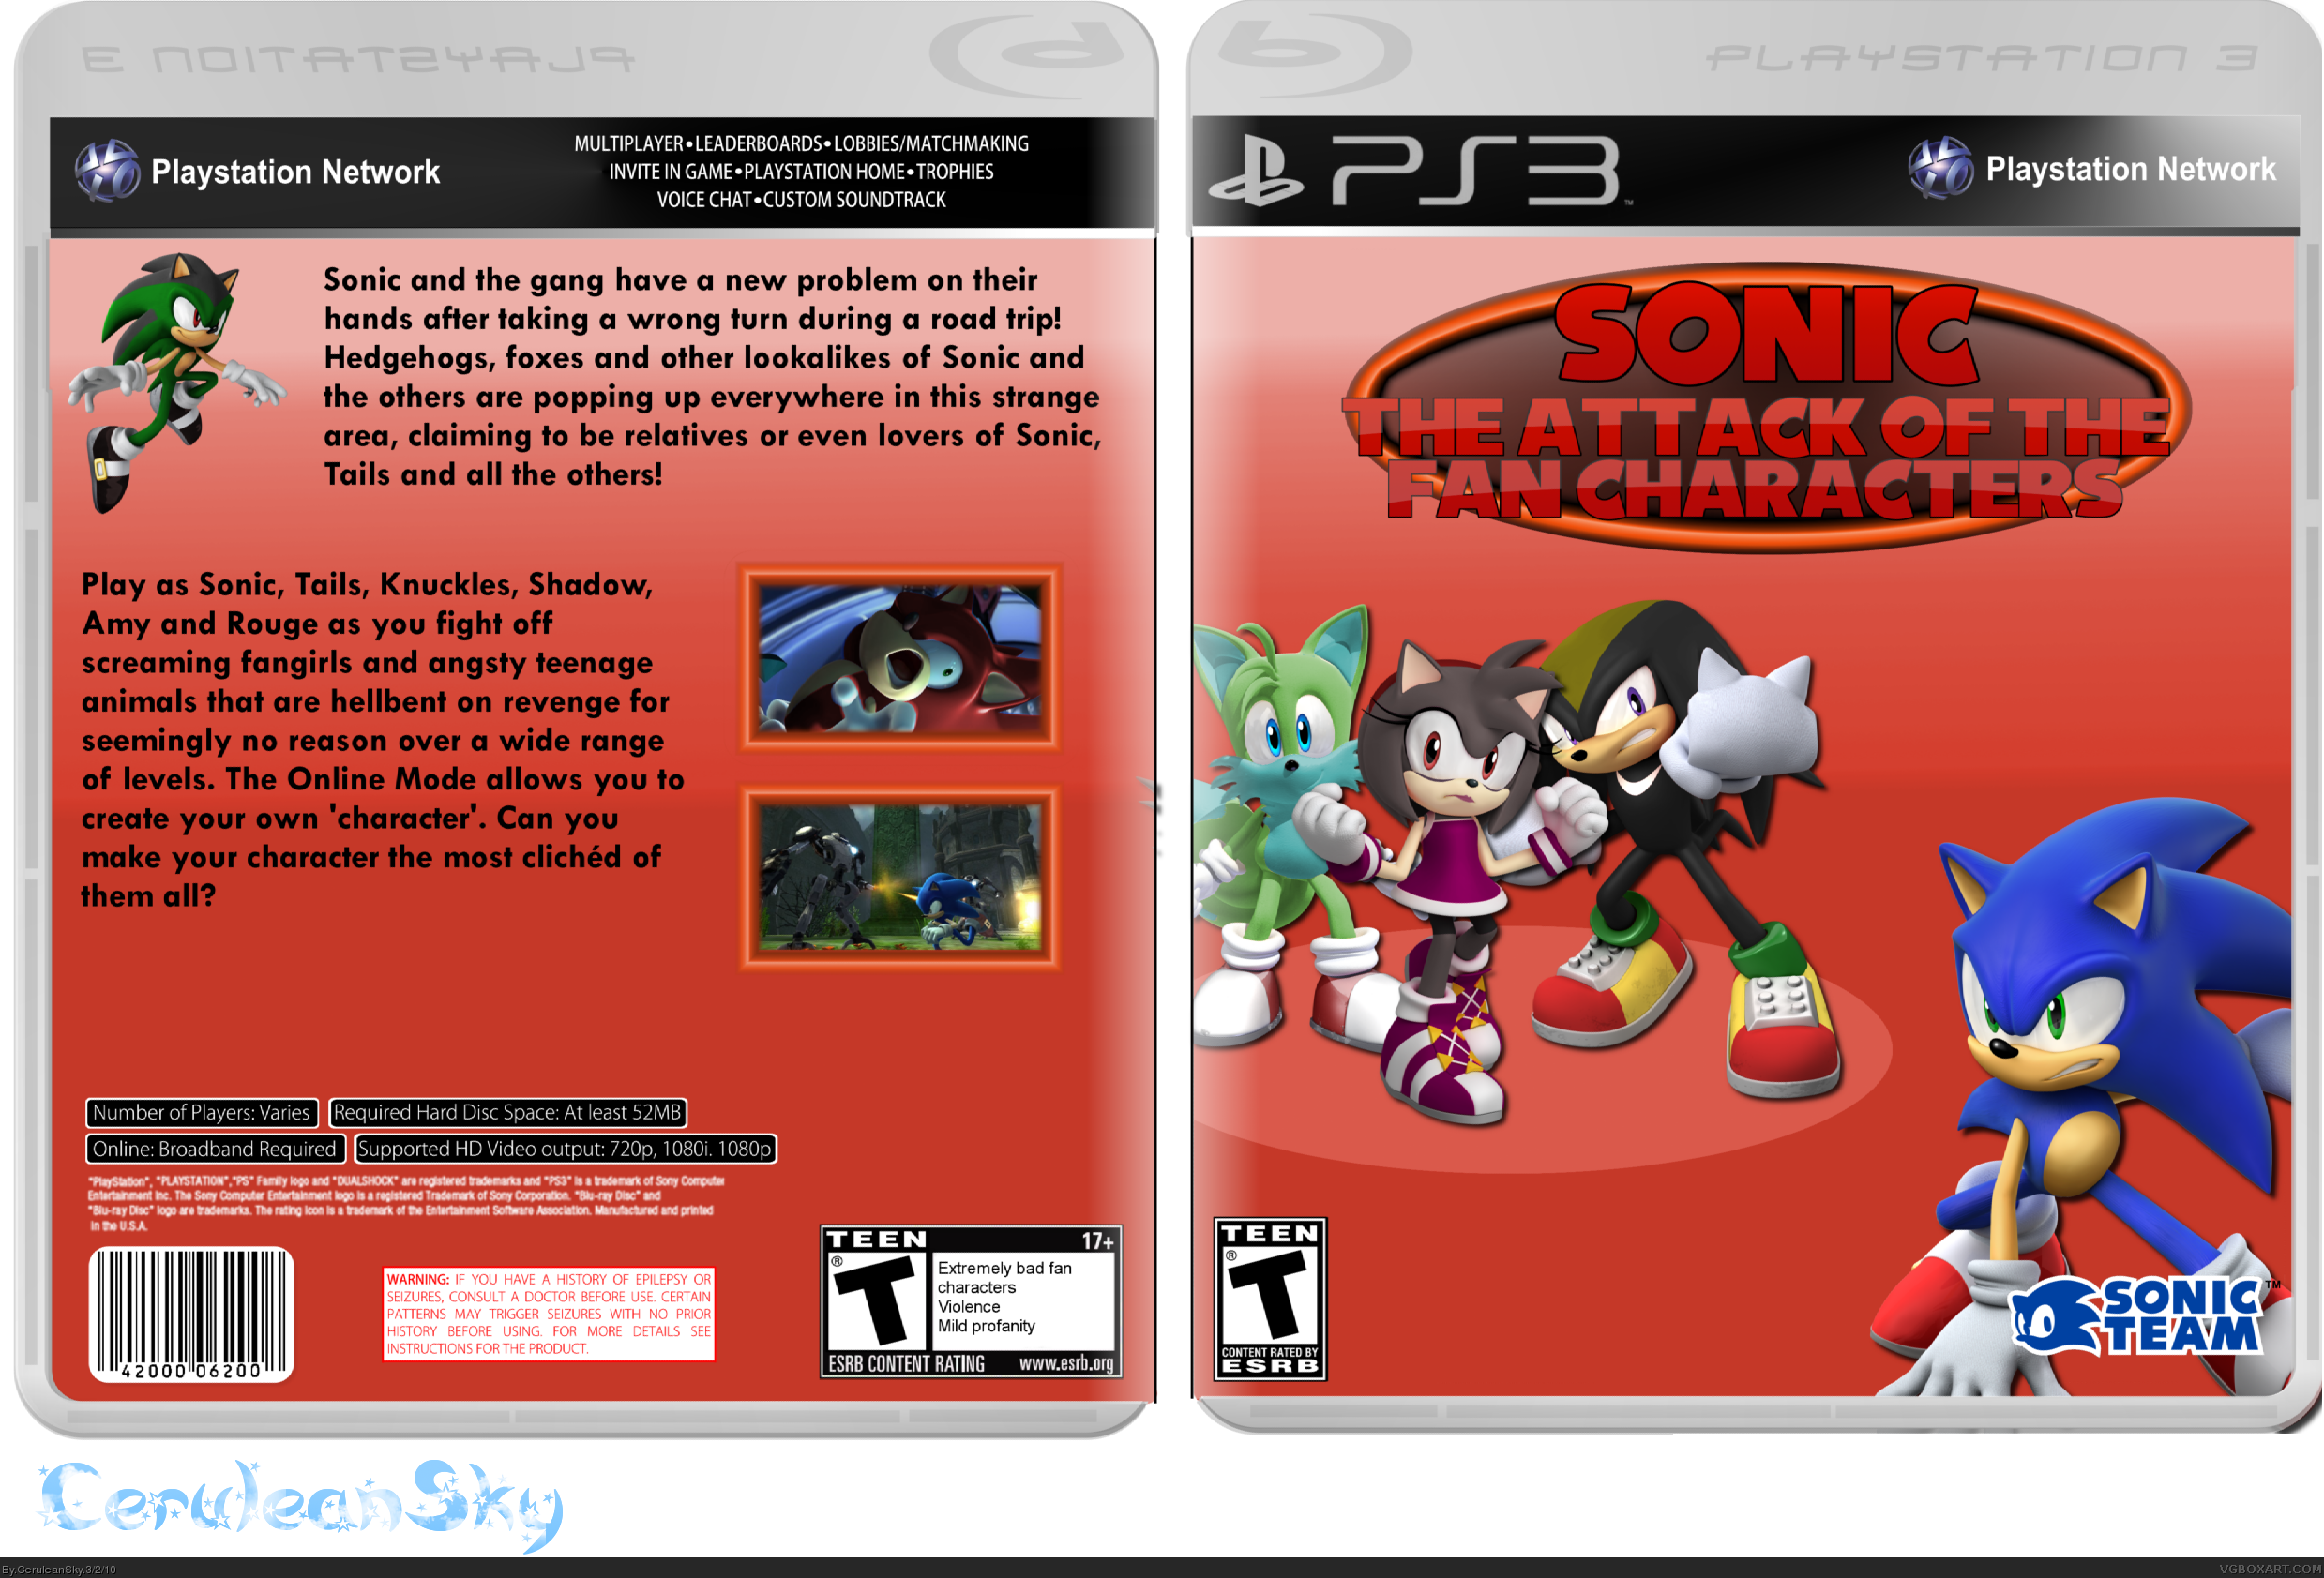 Sonic: The Attack of the Fan Characters box cover